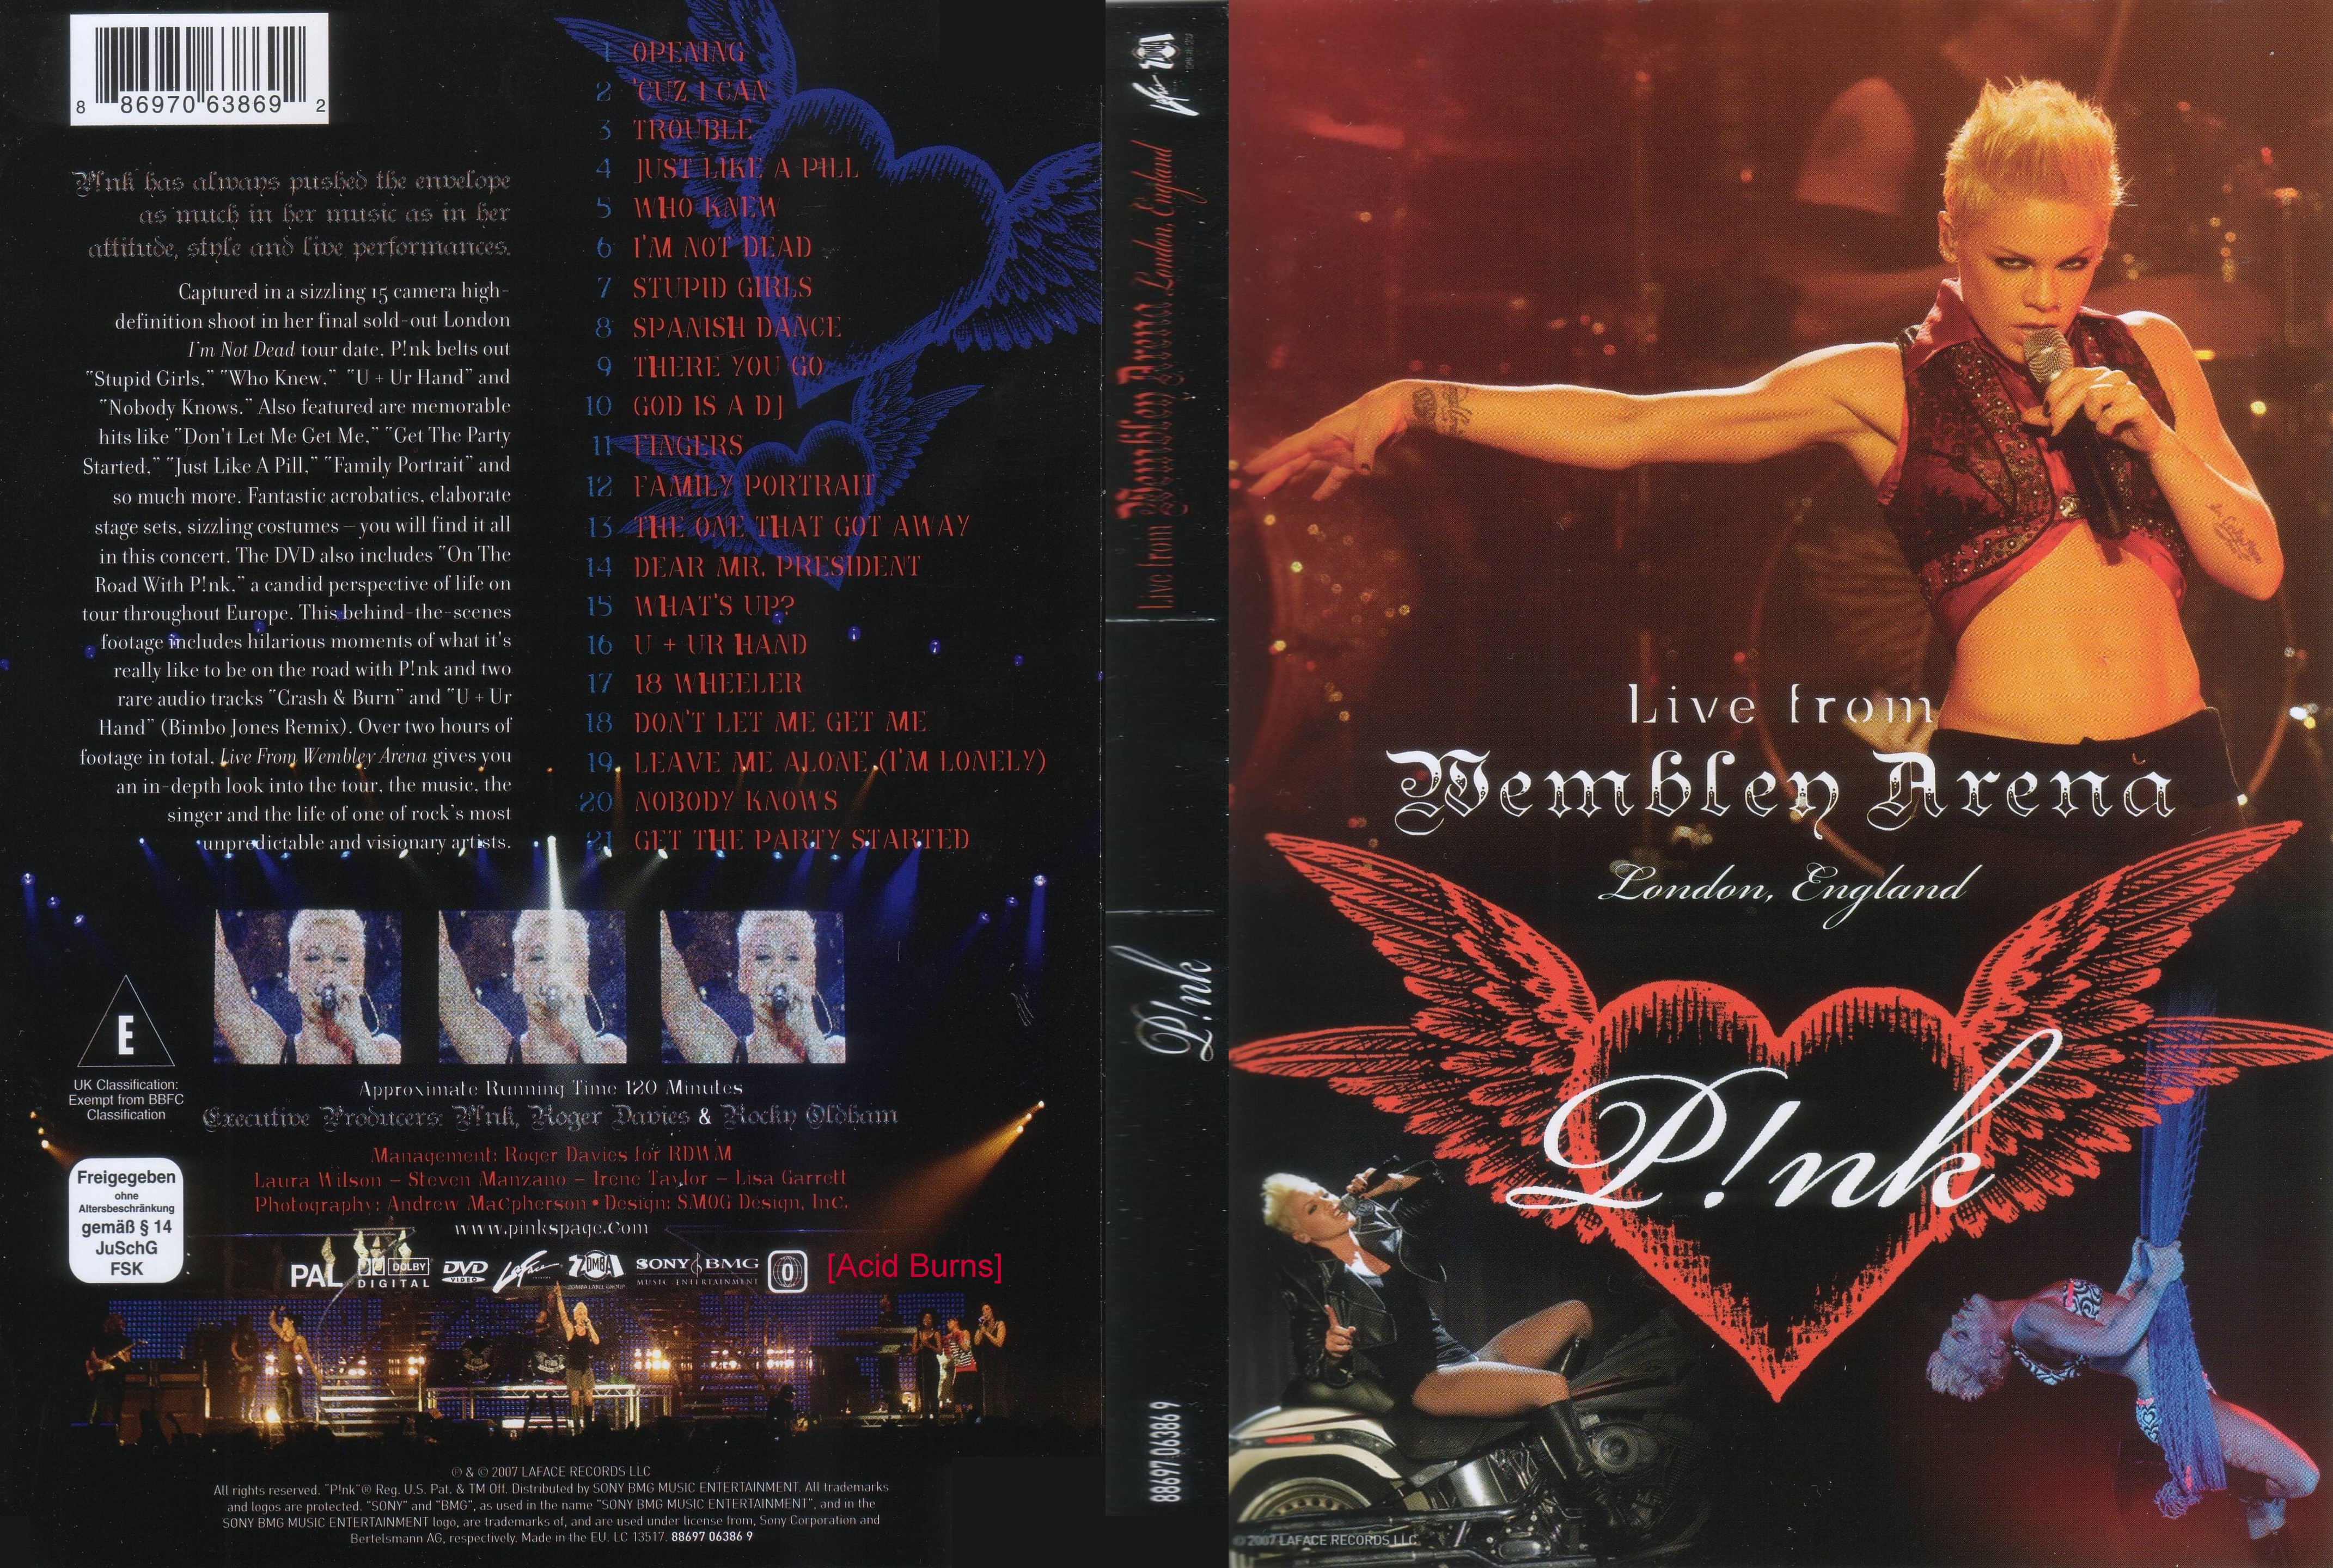 Jaquette DVD Pink - Live from Wembley arena